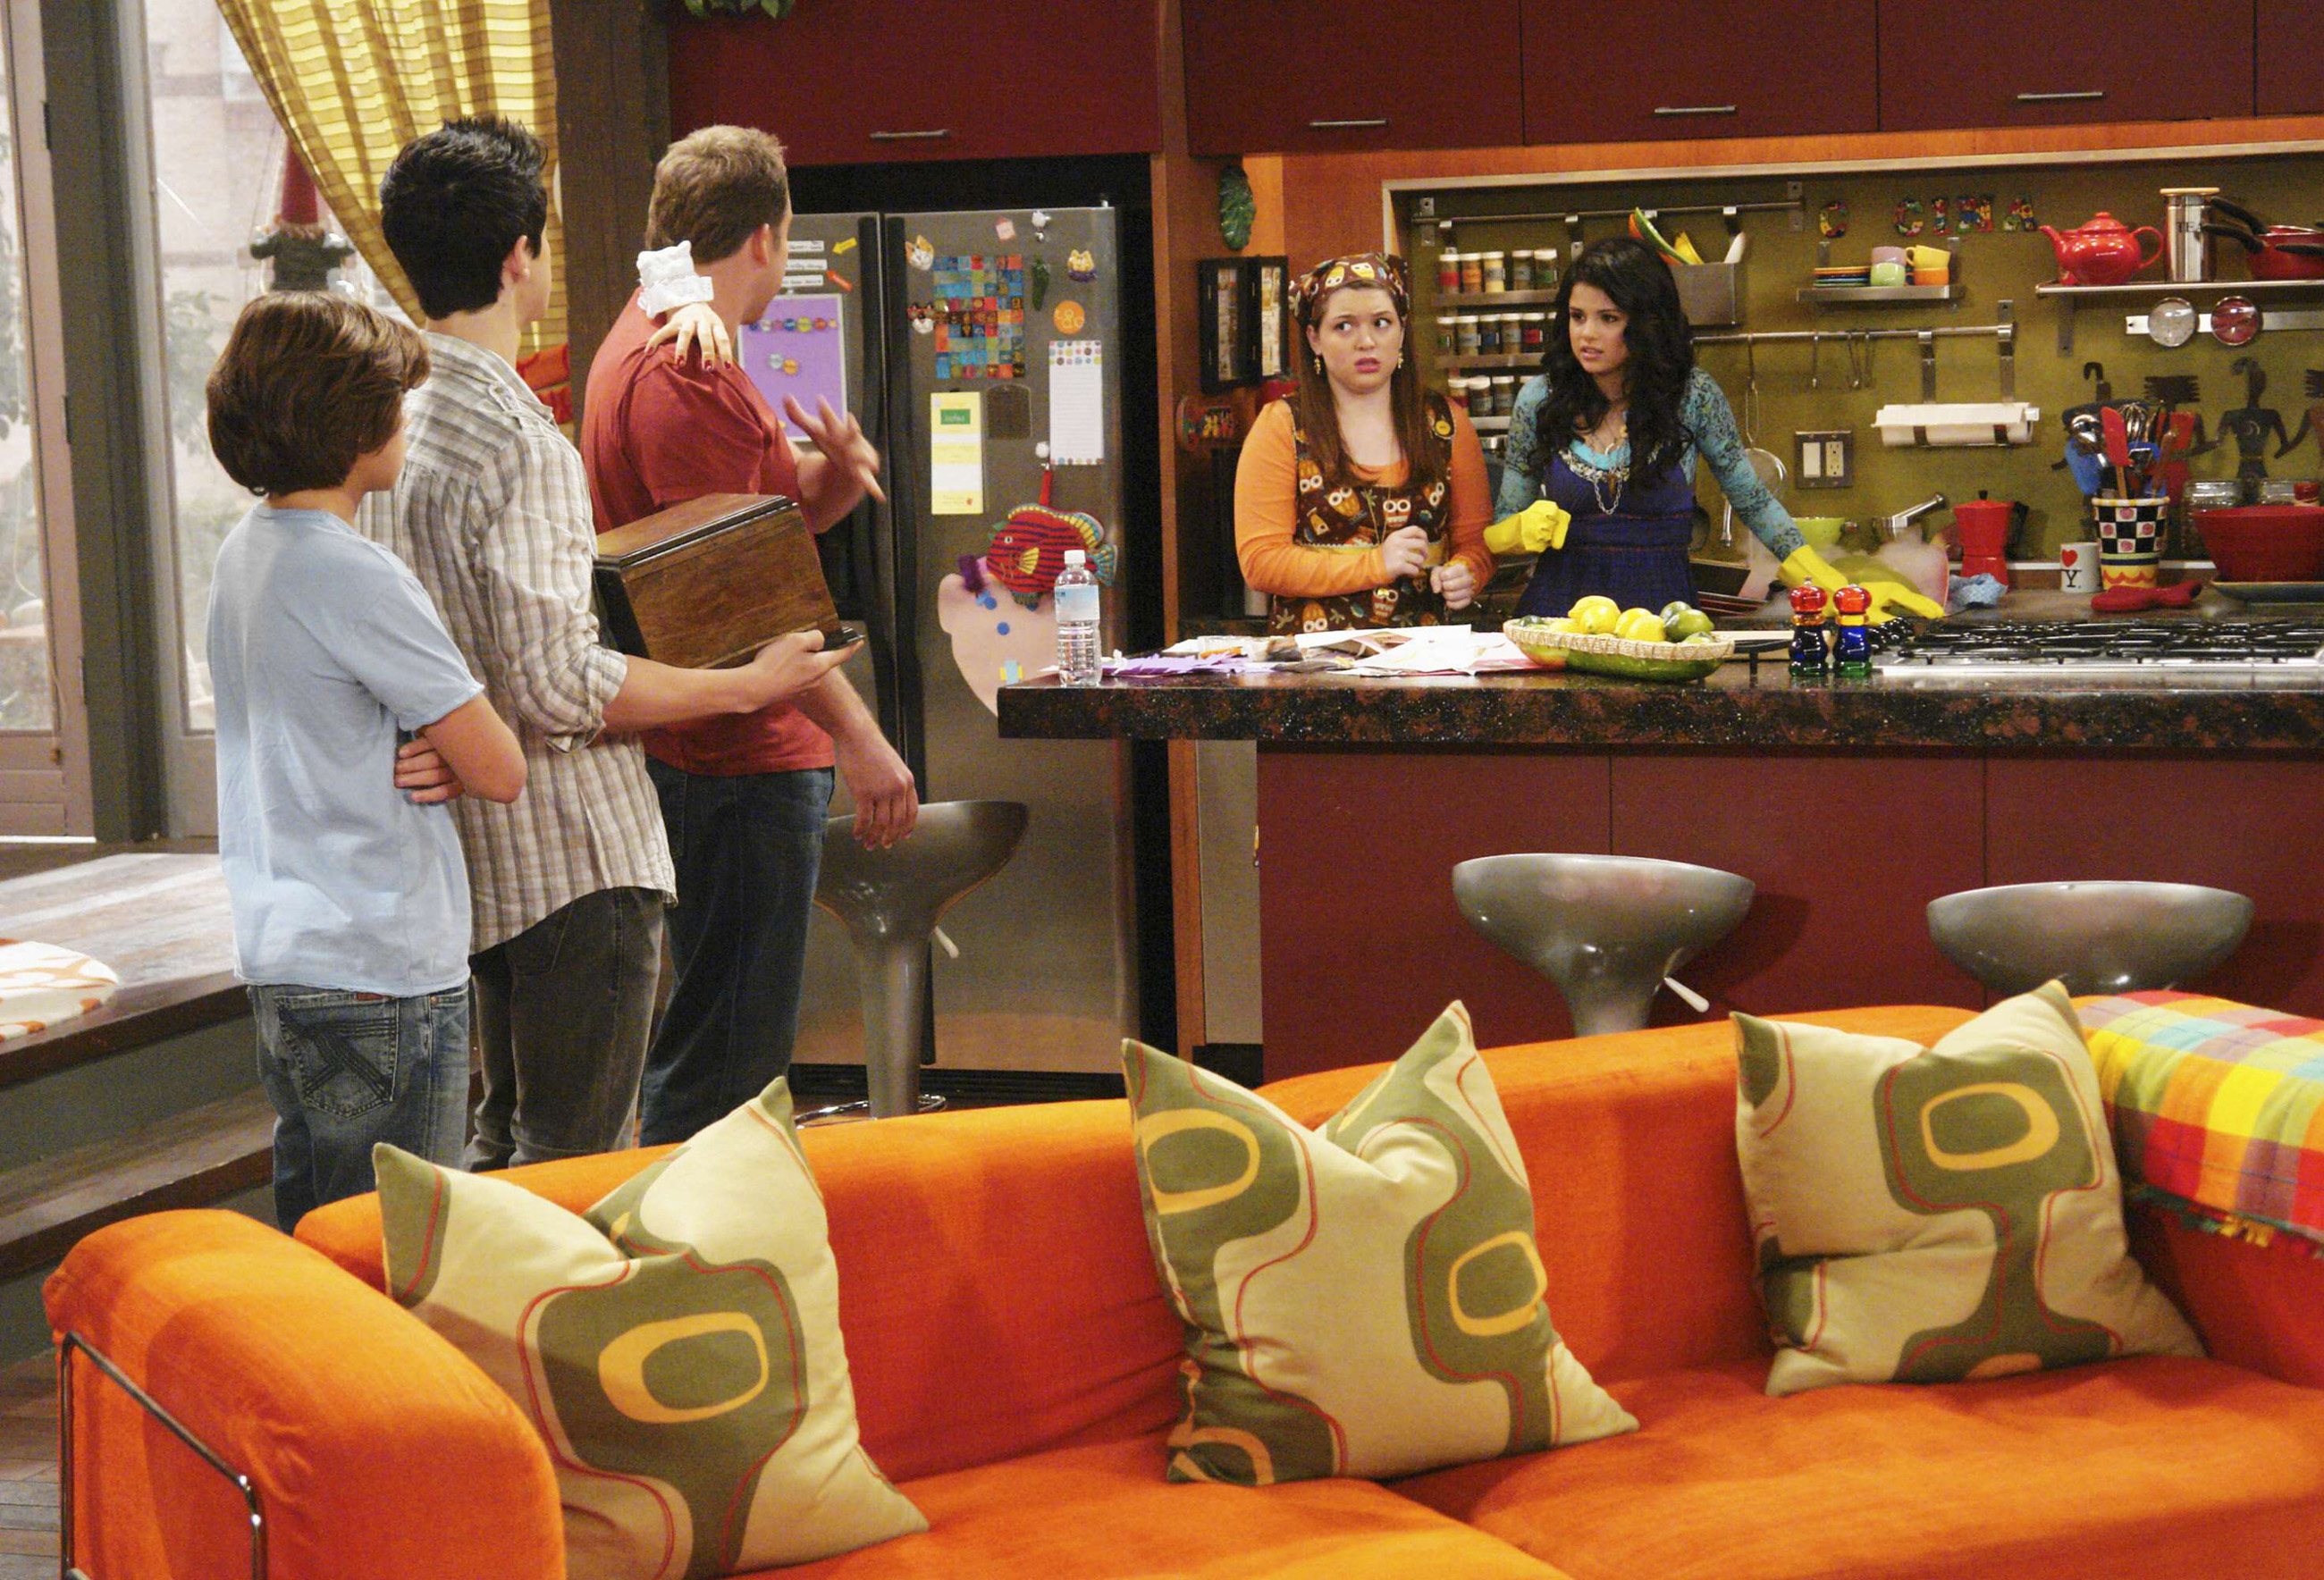 David Henrie in Wizards of Waverly Place (Season 2)